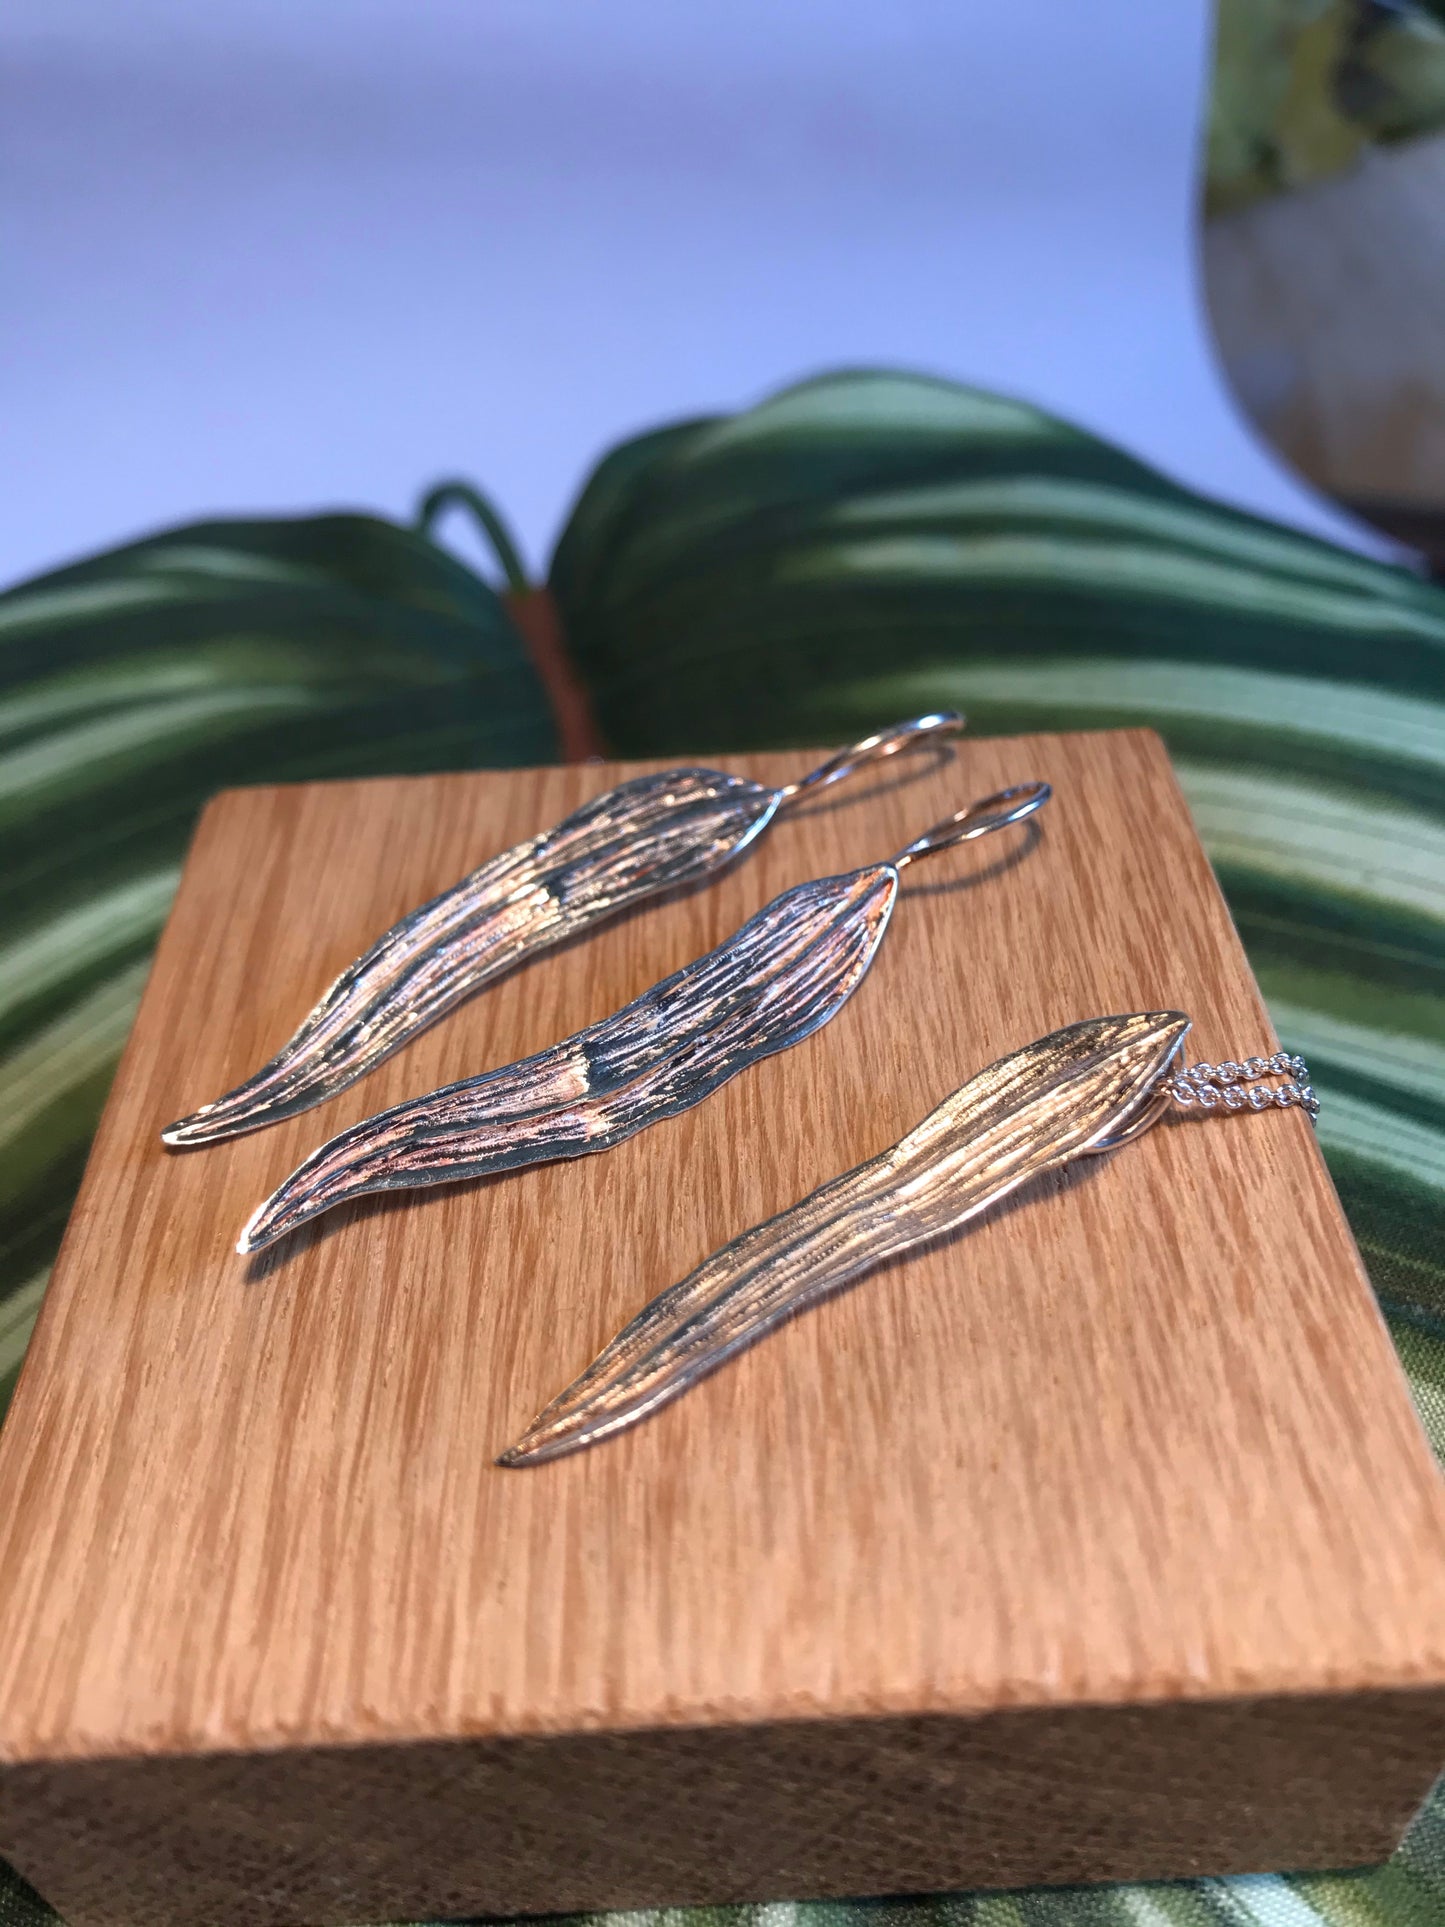 Sands Sliver Leaf Pendant and Earring Set - Sands Boutique clothing and gifts